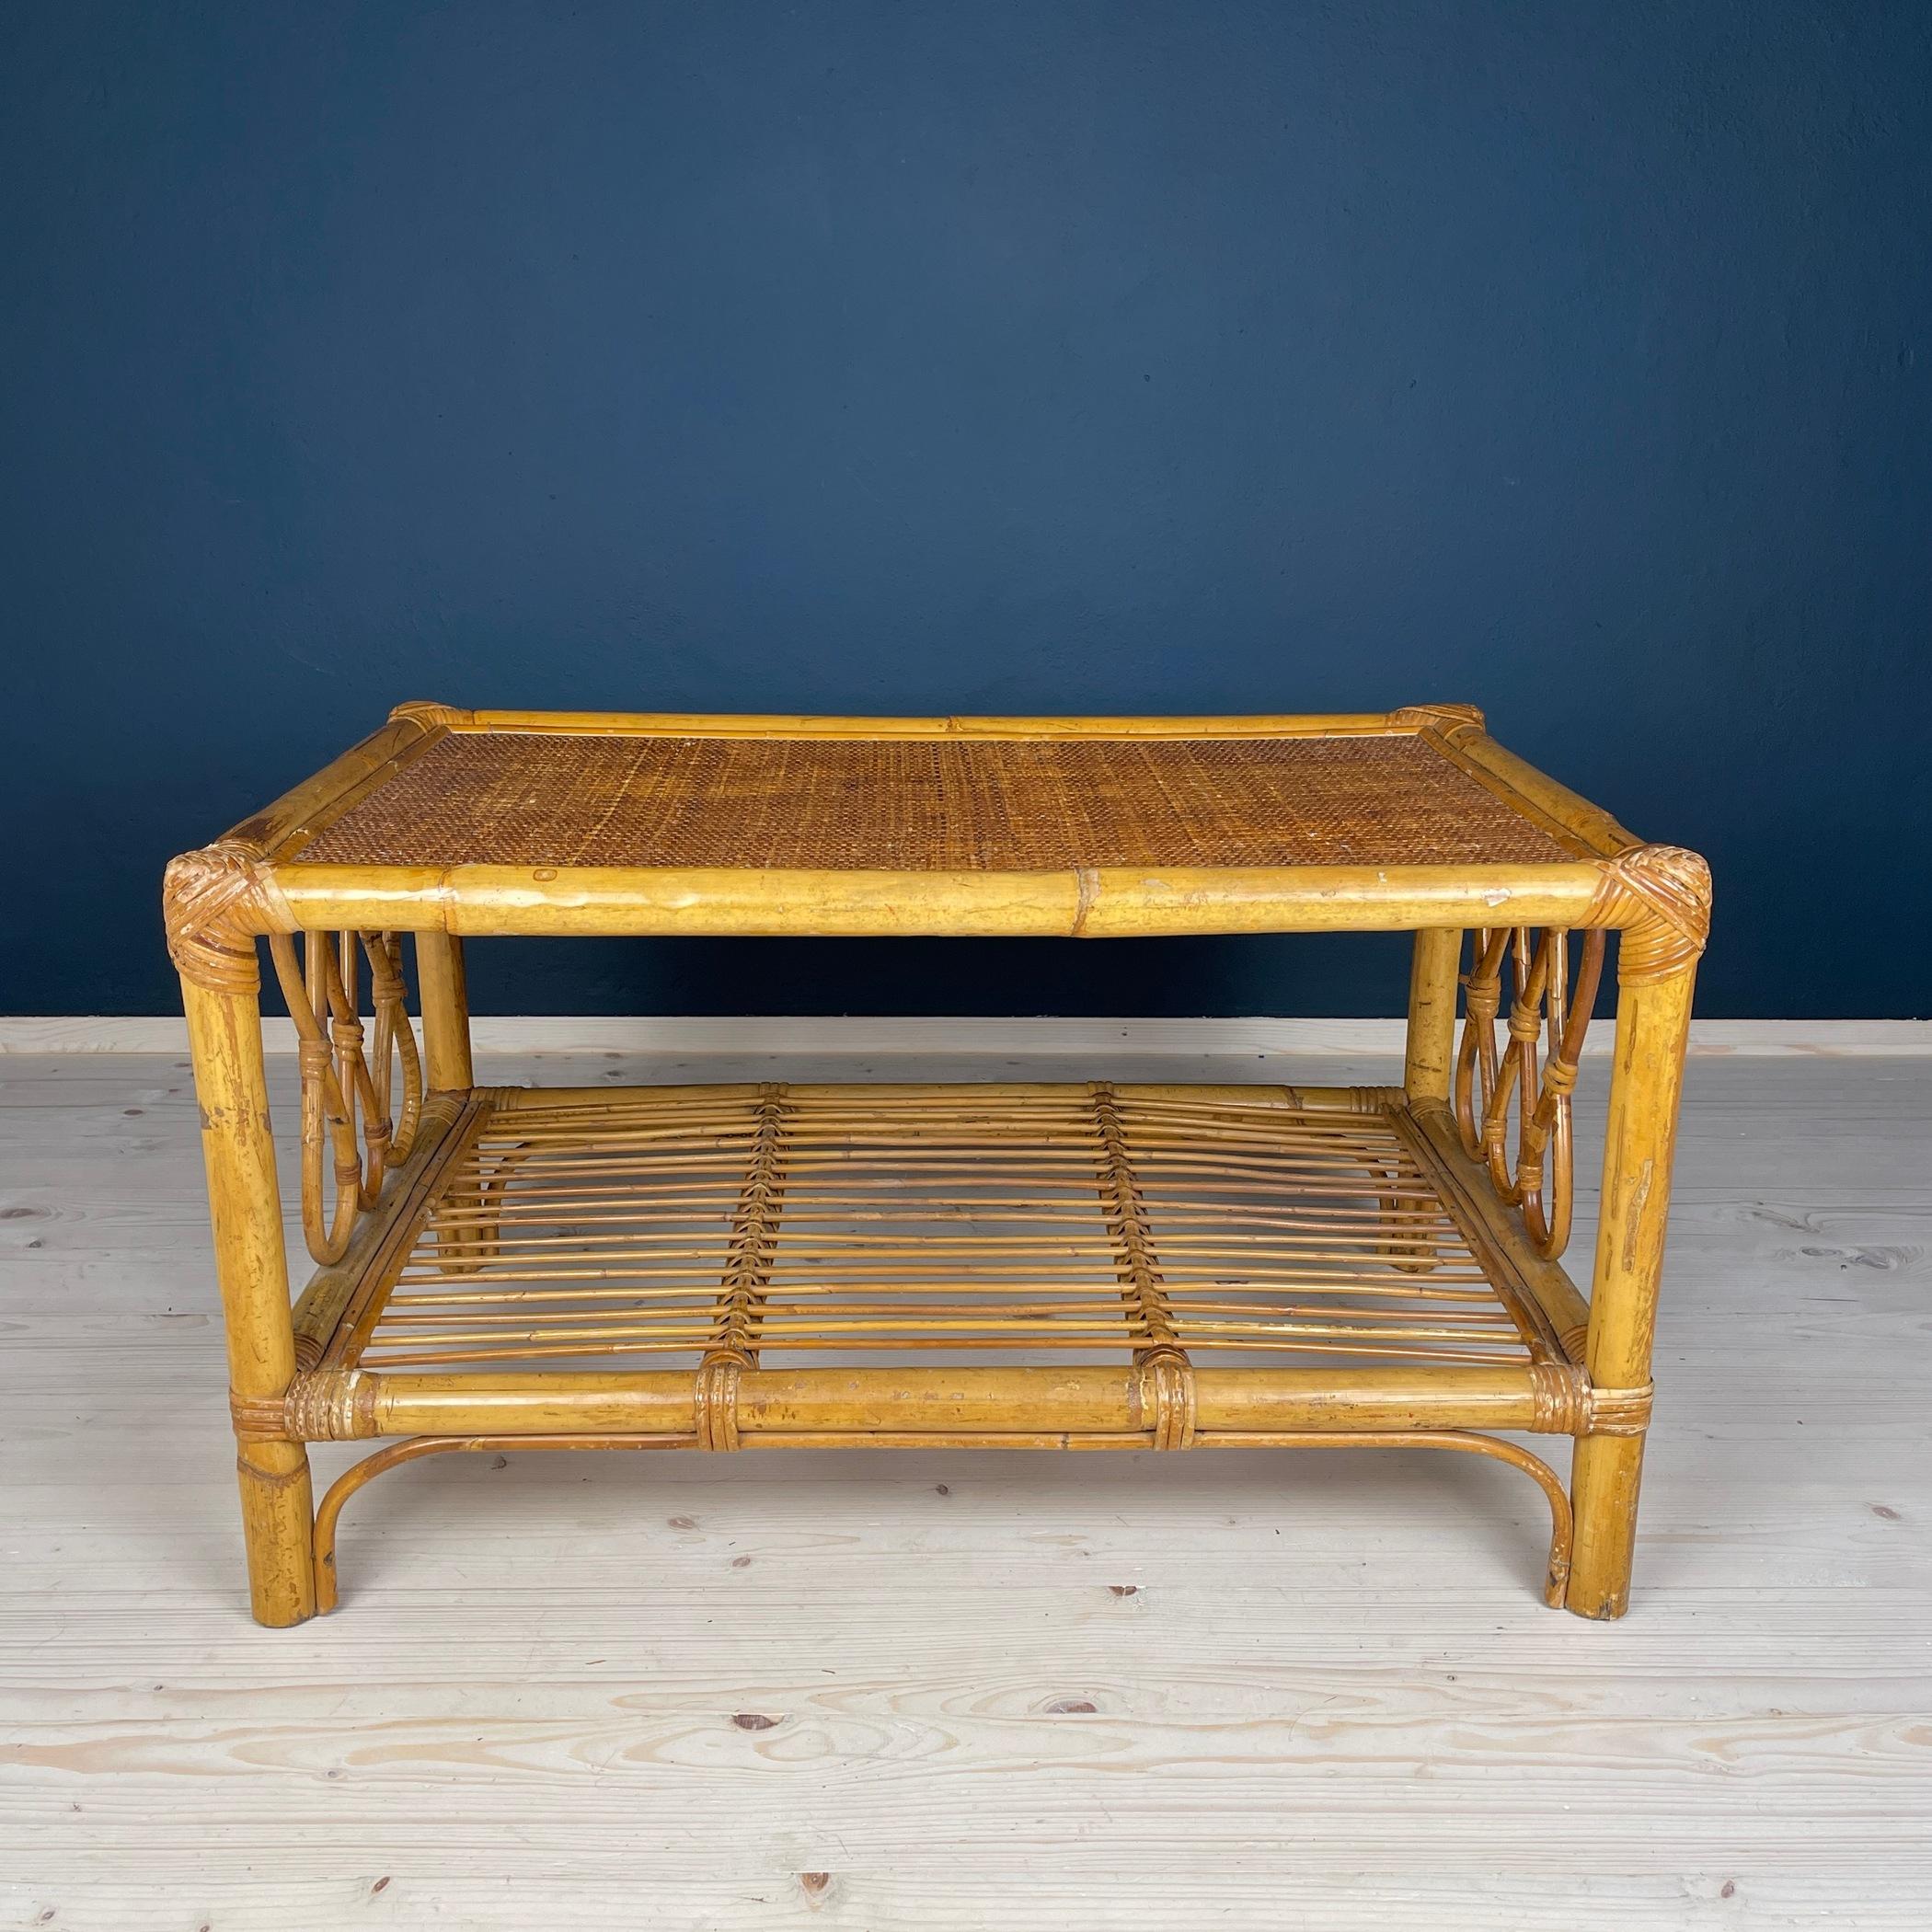 Enhance your living space with this exquisite vintage rattan coffee table, hailing from the 1970s and crafted in the heart of Italy. Skillfully made from natural rattan, this table is a testament to its durability and stability, characteristics that